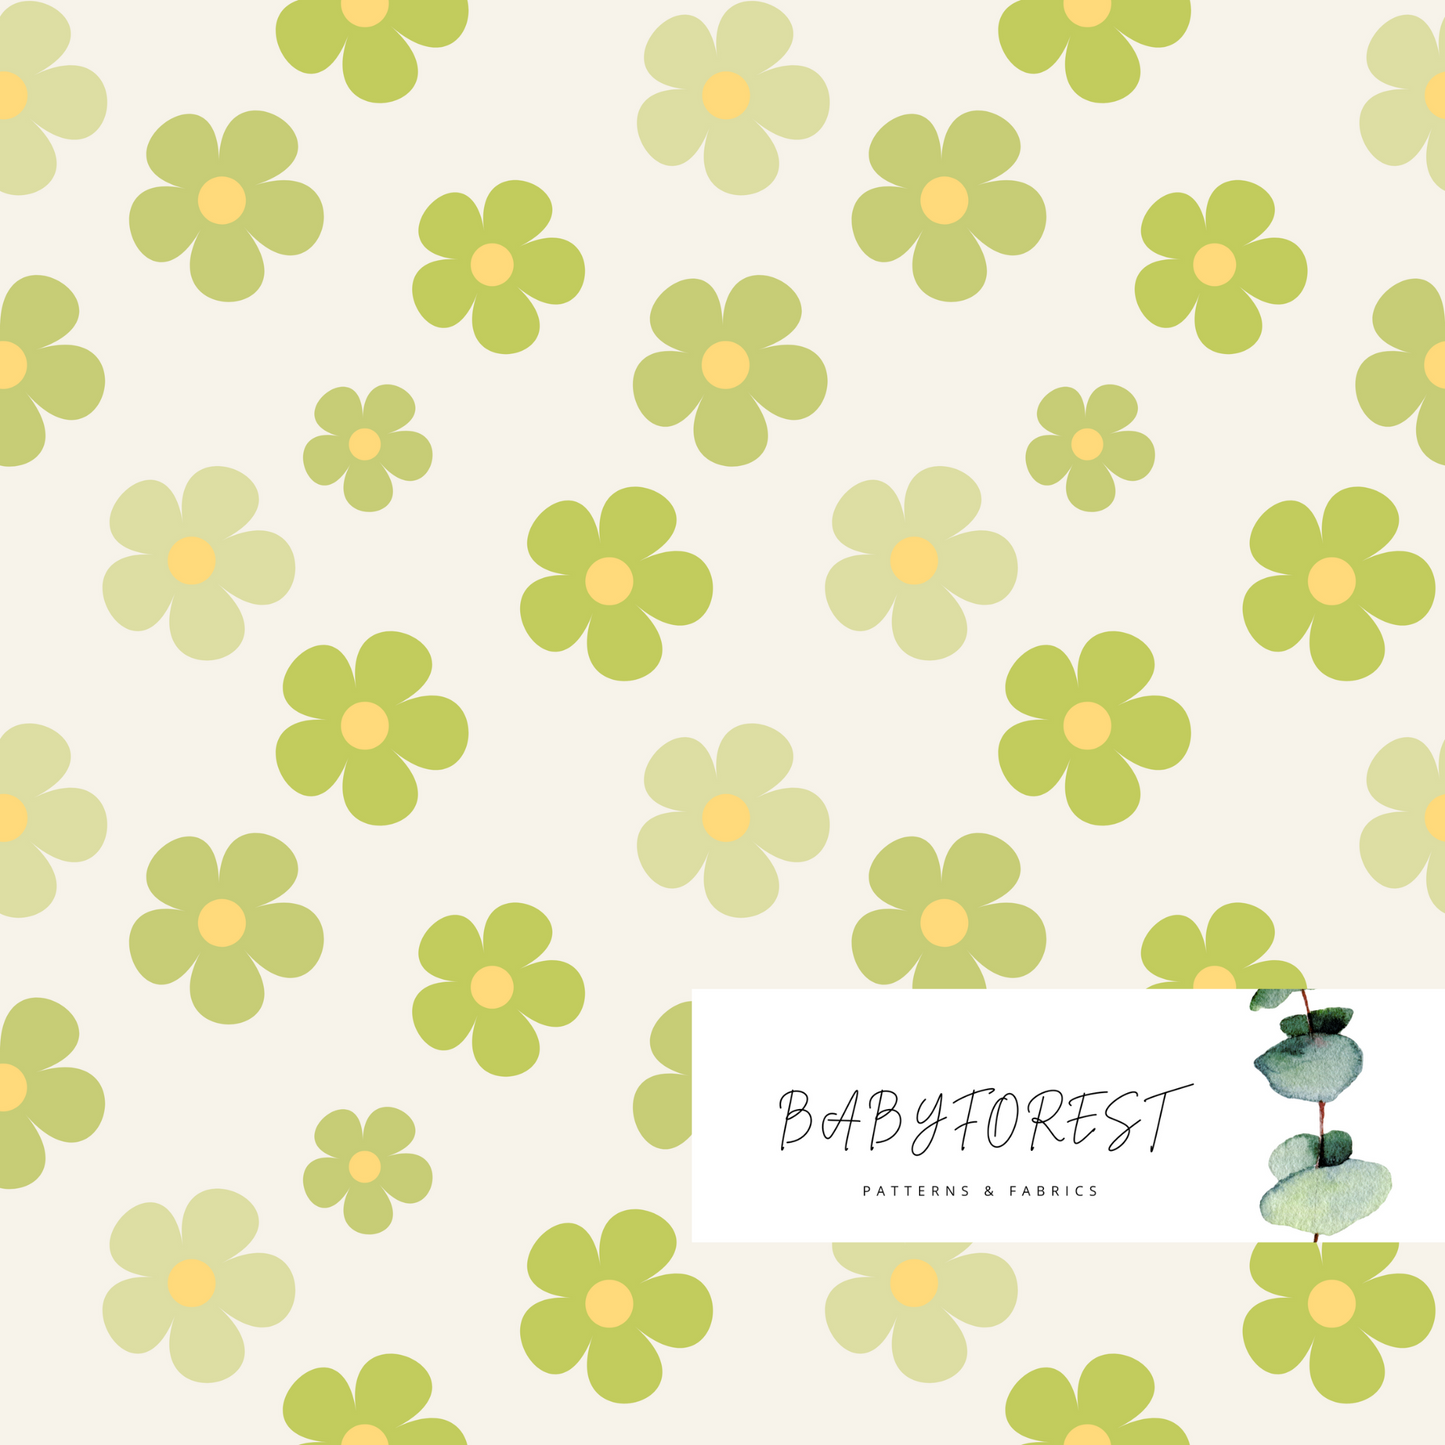 Green floral seamless pattern